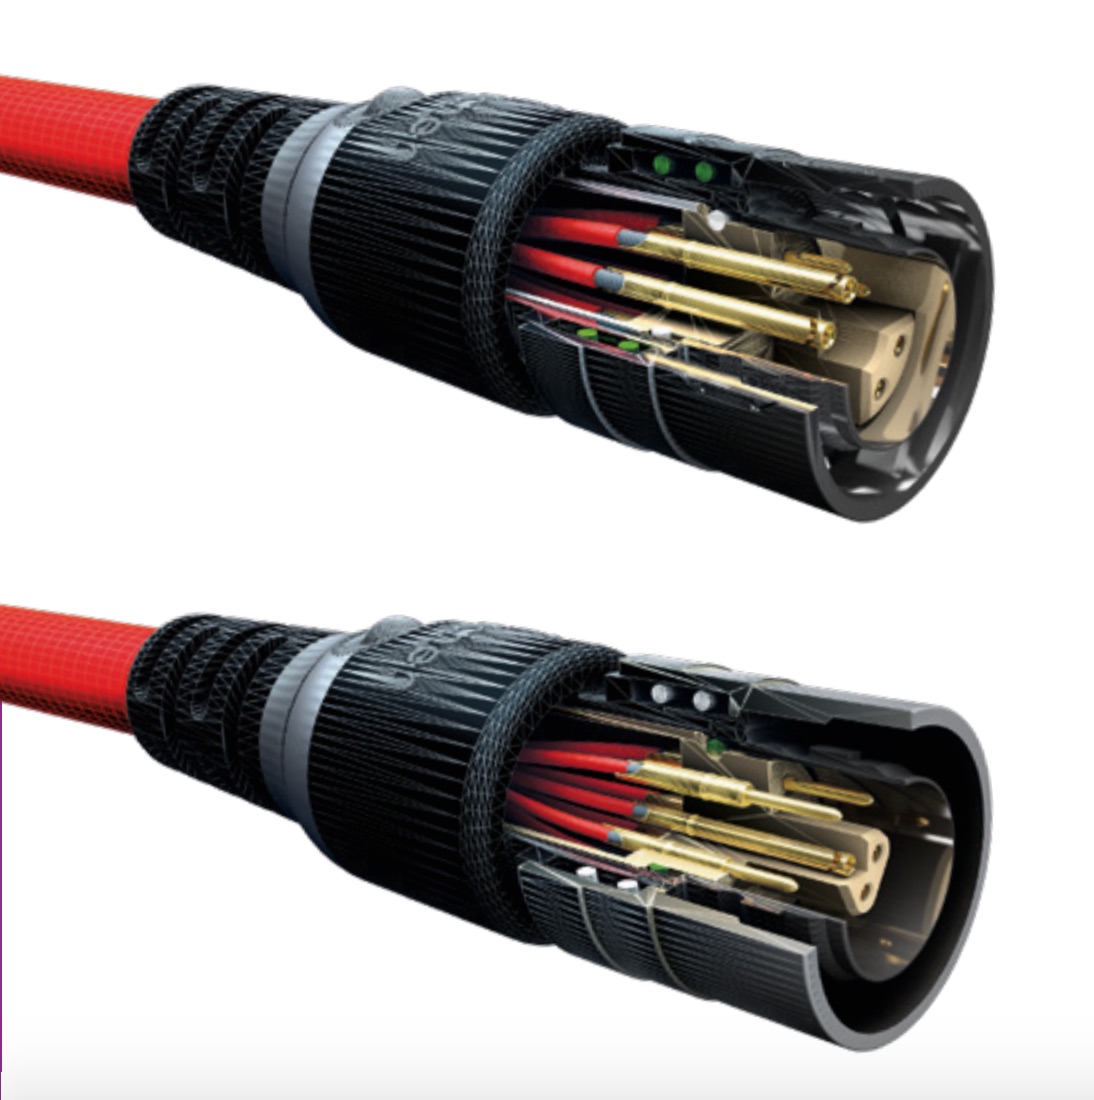 Fischer MiniMax hermaphroditic ethernet and USB connectors